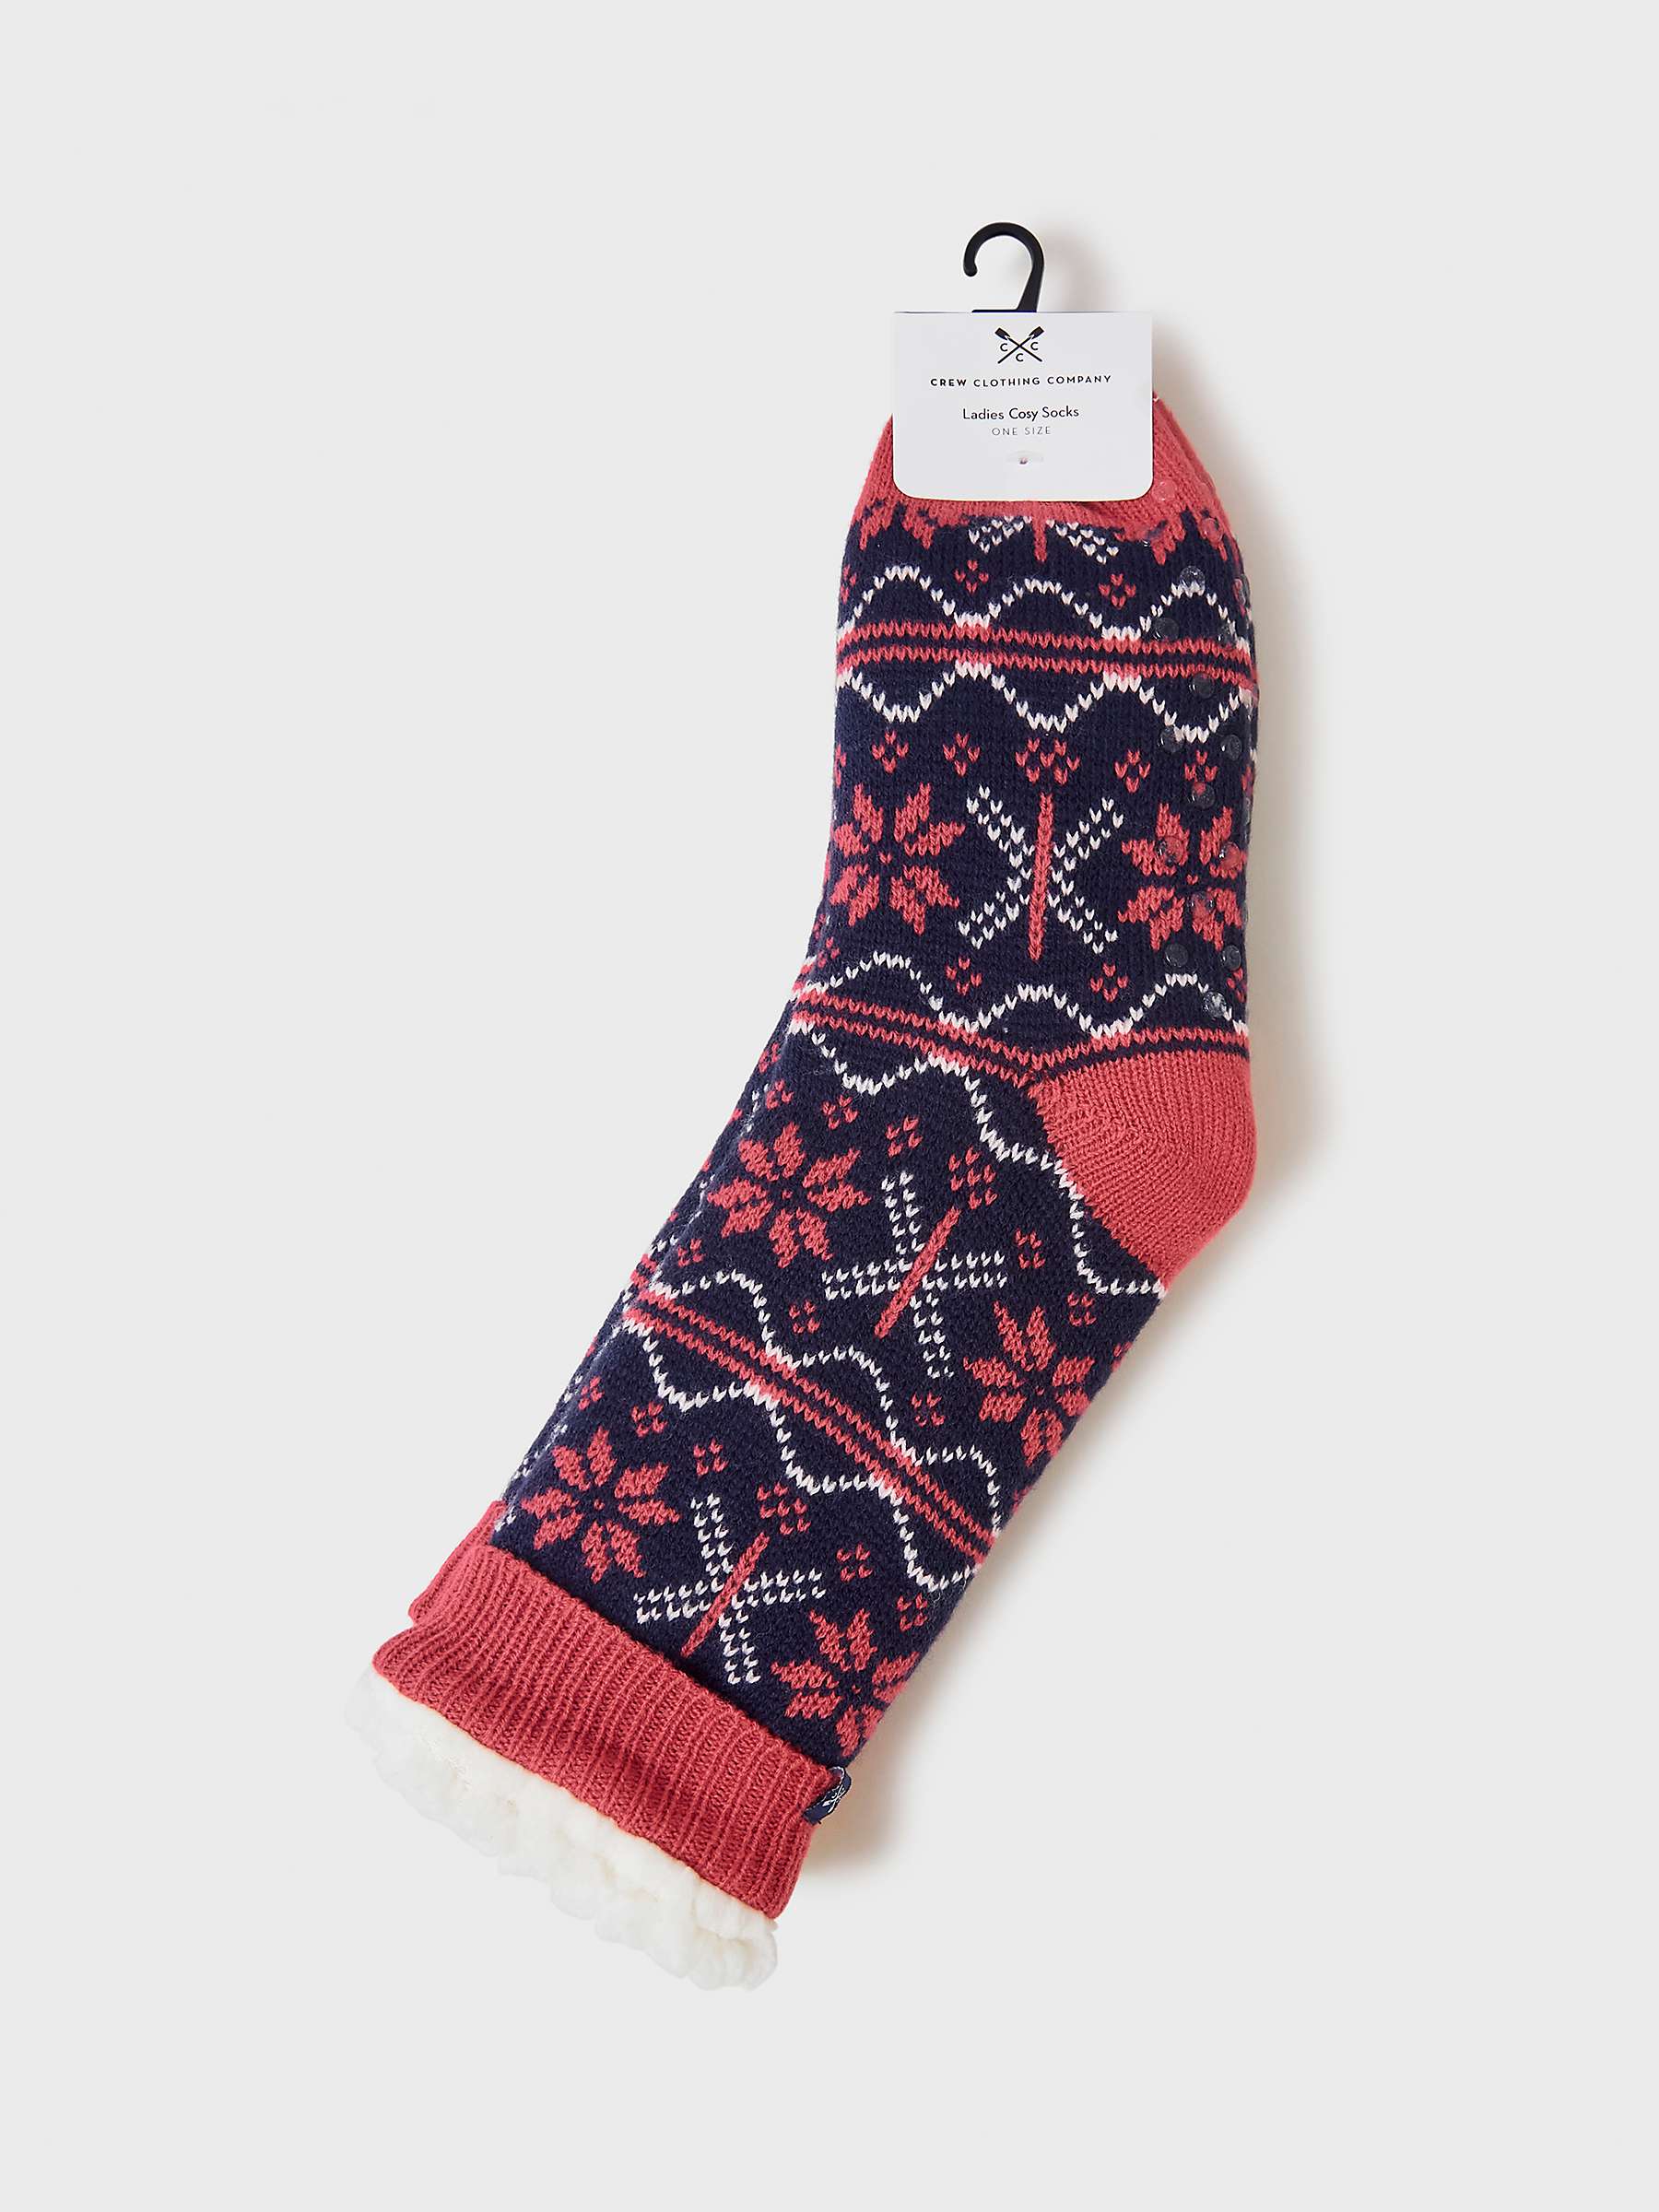 Buy Crew Clothing Fair Isle Bed Socks, Navy Blue, One Size Online at johnlewis.com